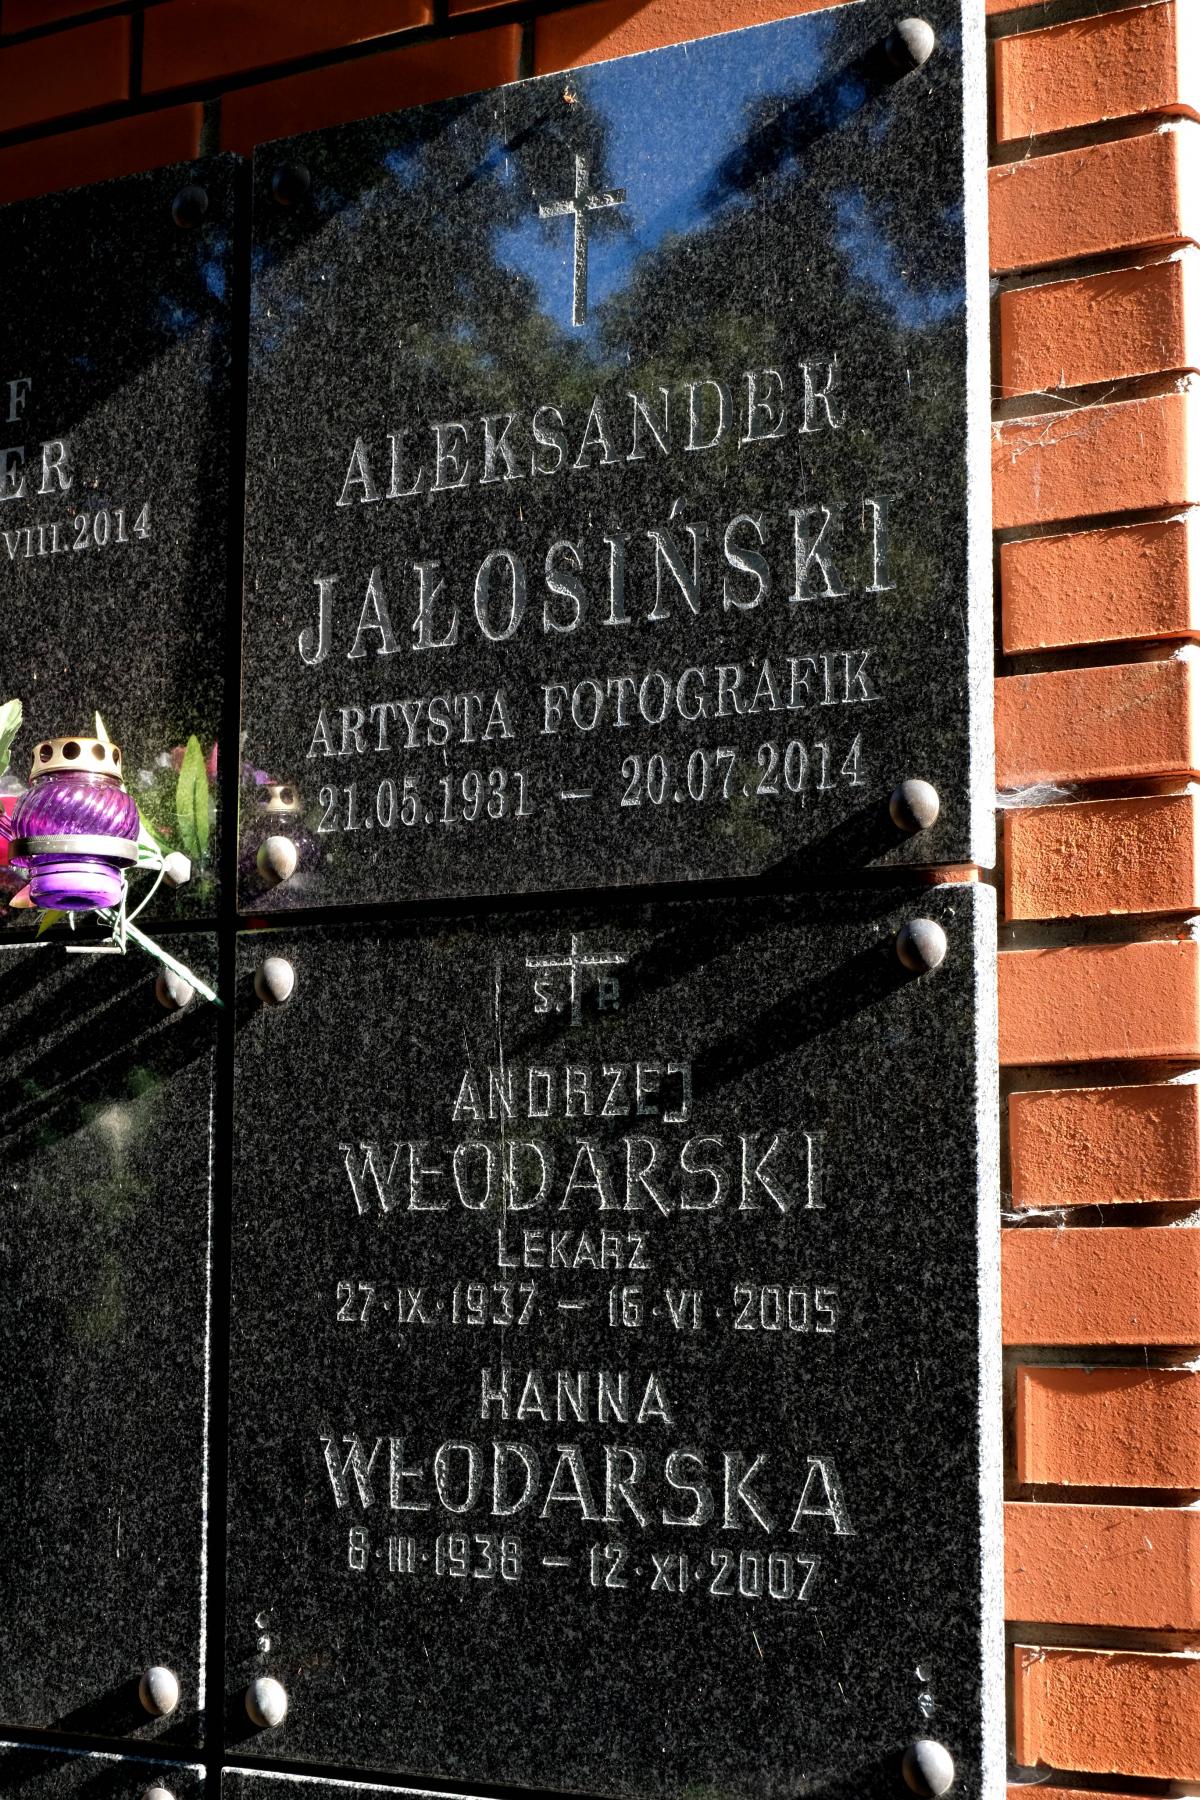 Wikipedia, Evangelical-Augsburg Cemetery in Warsaw, Self-published work